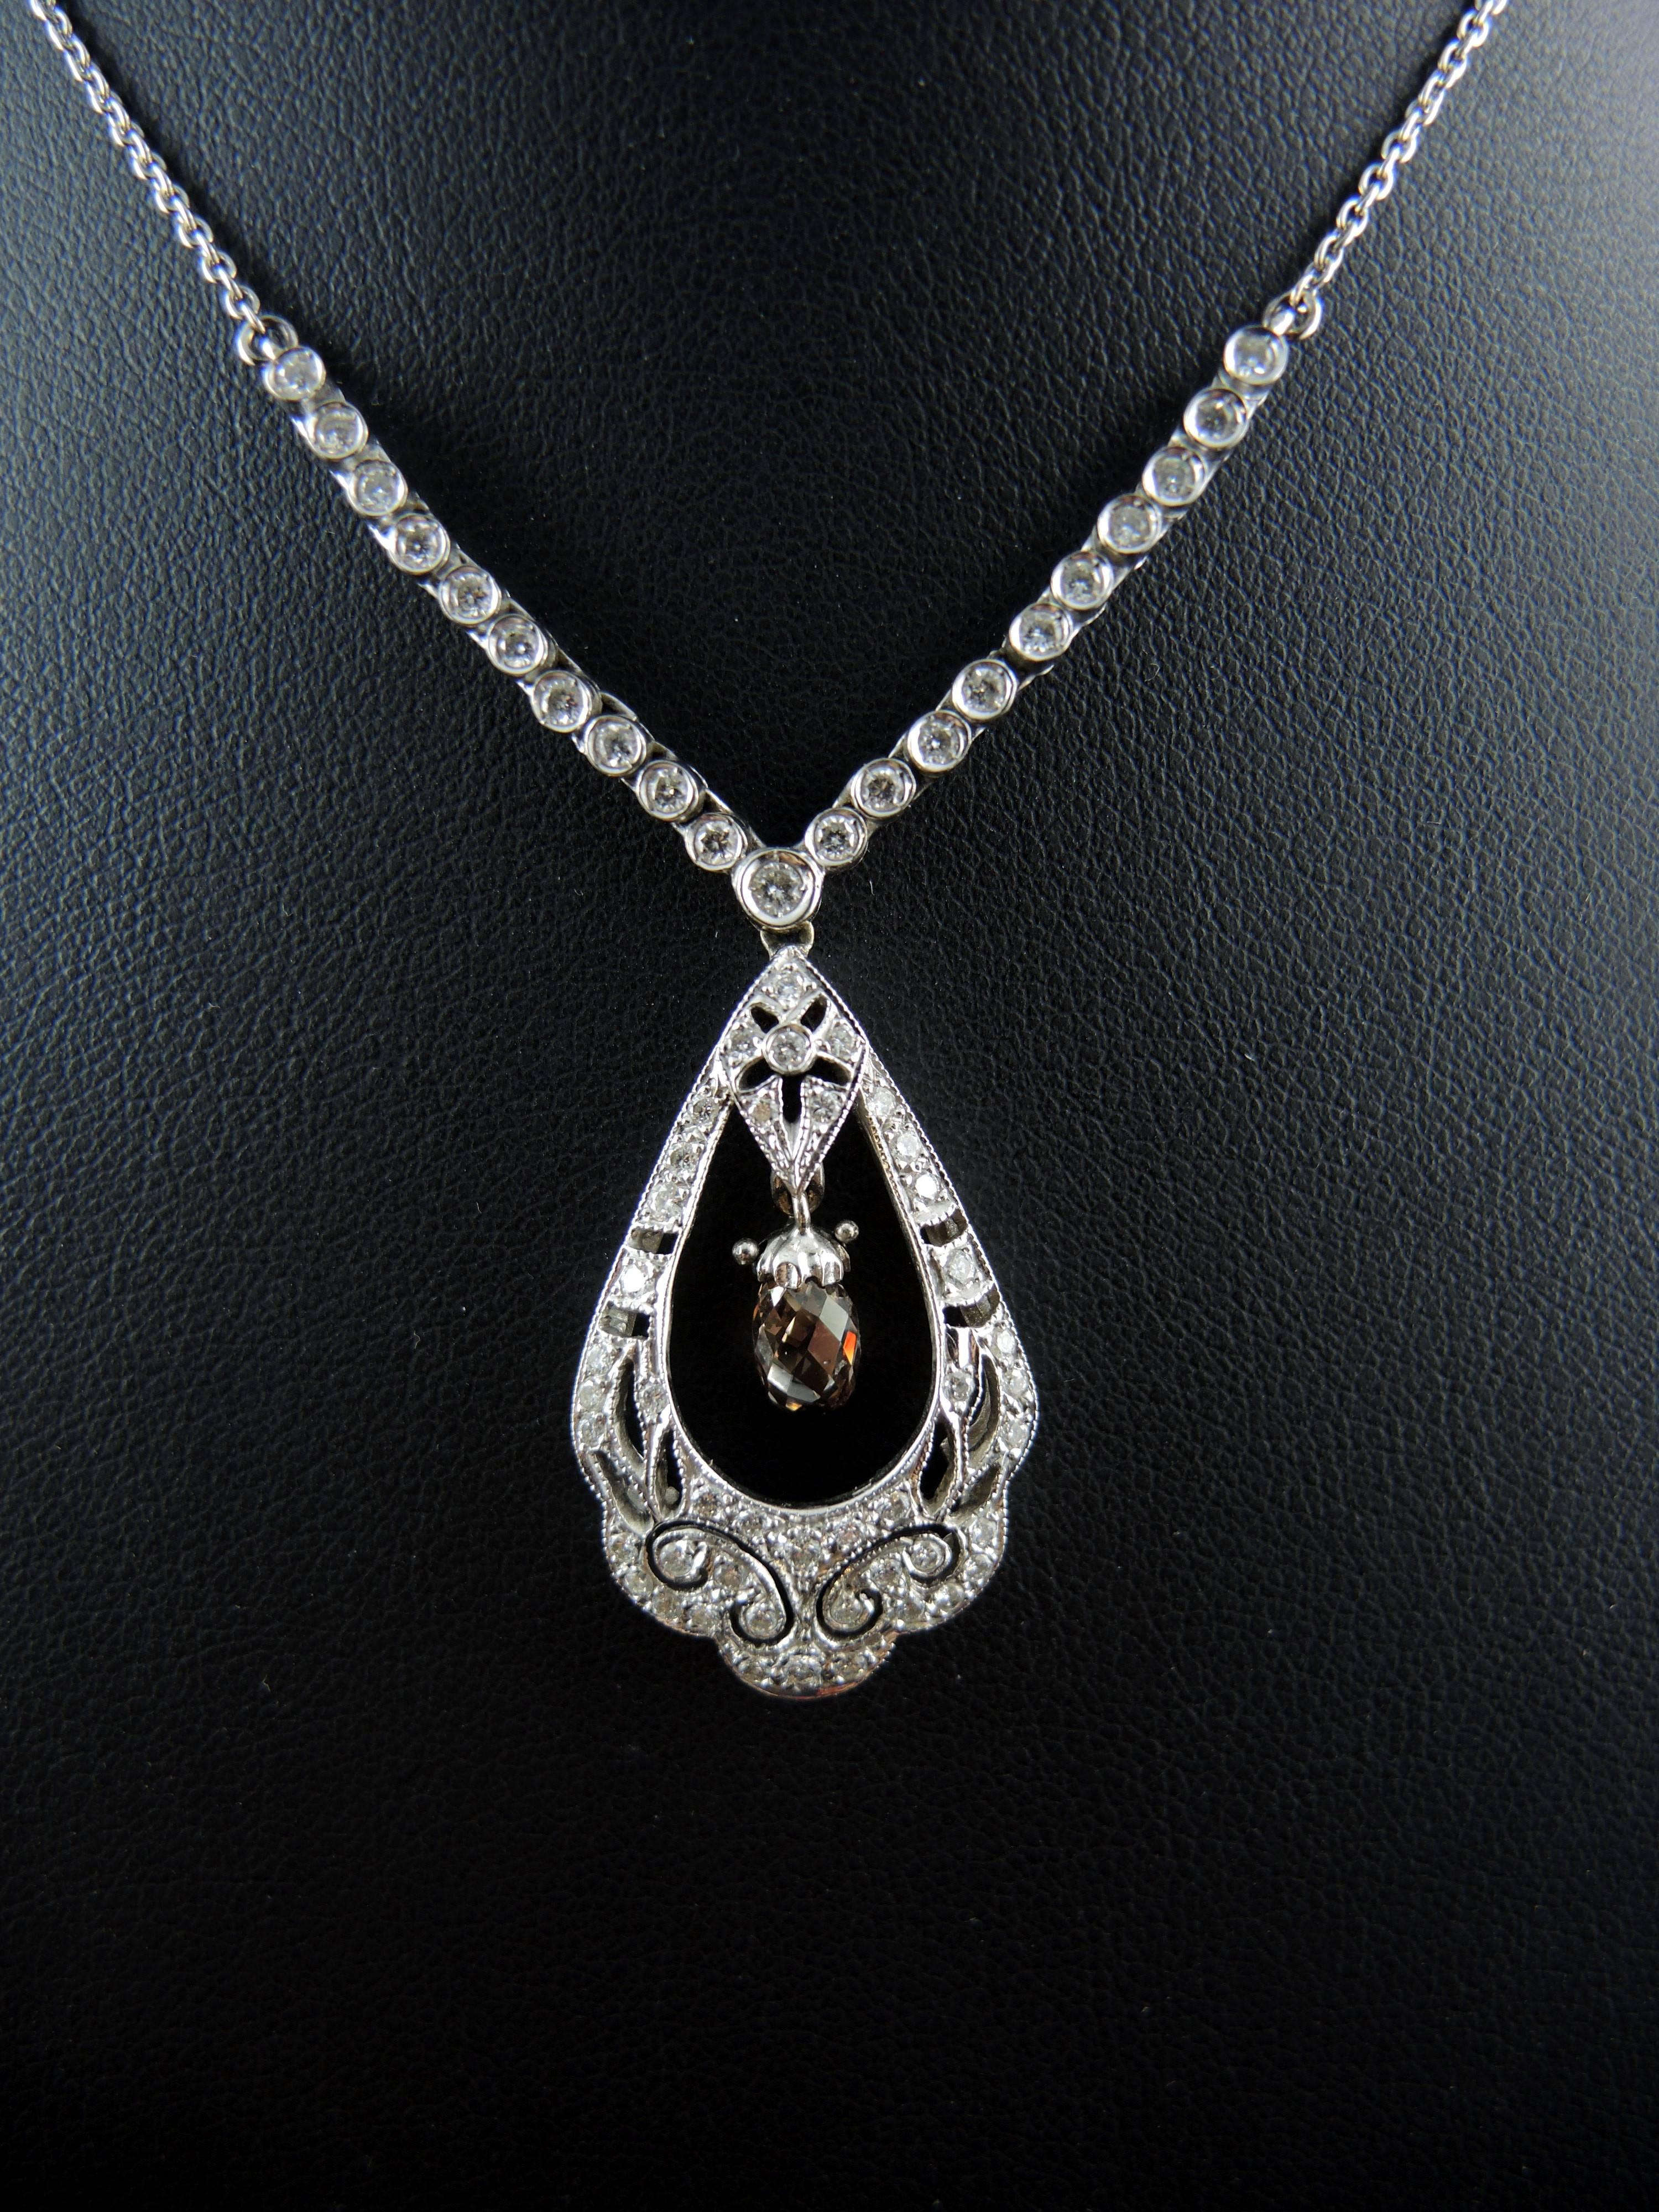 18 kt white gold necklace (quality mark: eagle's head), with a pendant set with a briolette shape cognac diamond and round brilliant cut diamonds  (total weight 1,40 cts).

Chain's lenght: 46.00 cm
Pendant's length: 3.50 cm